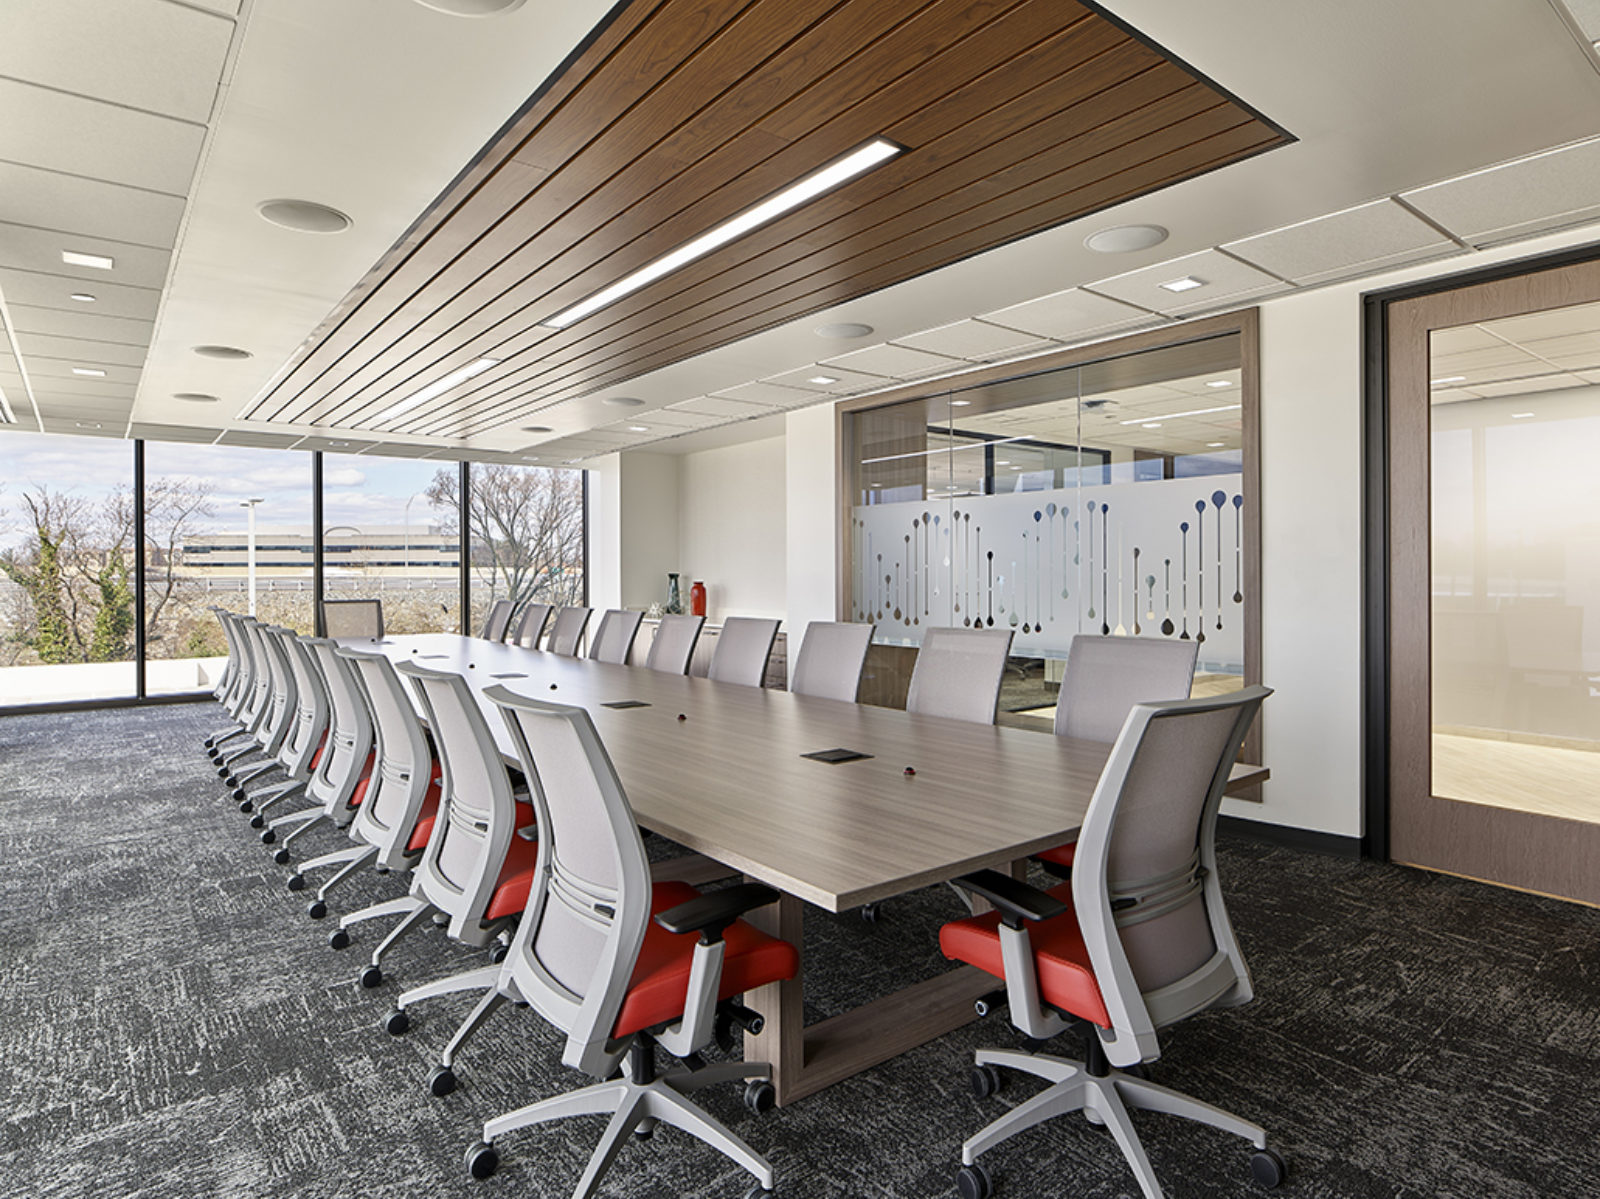 Conference room with wooden table, chairs with red fabric seat and grey mesh back